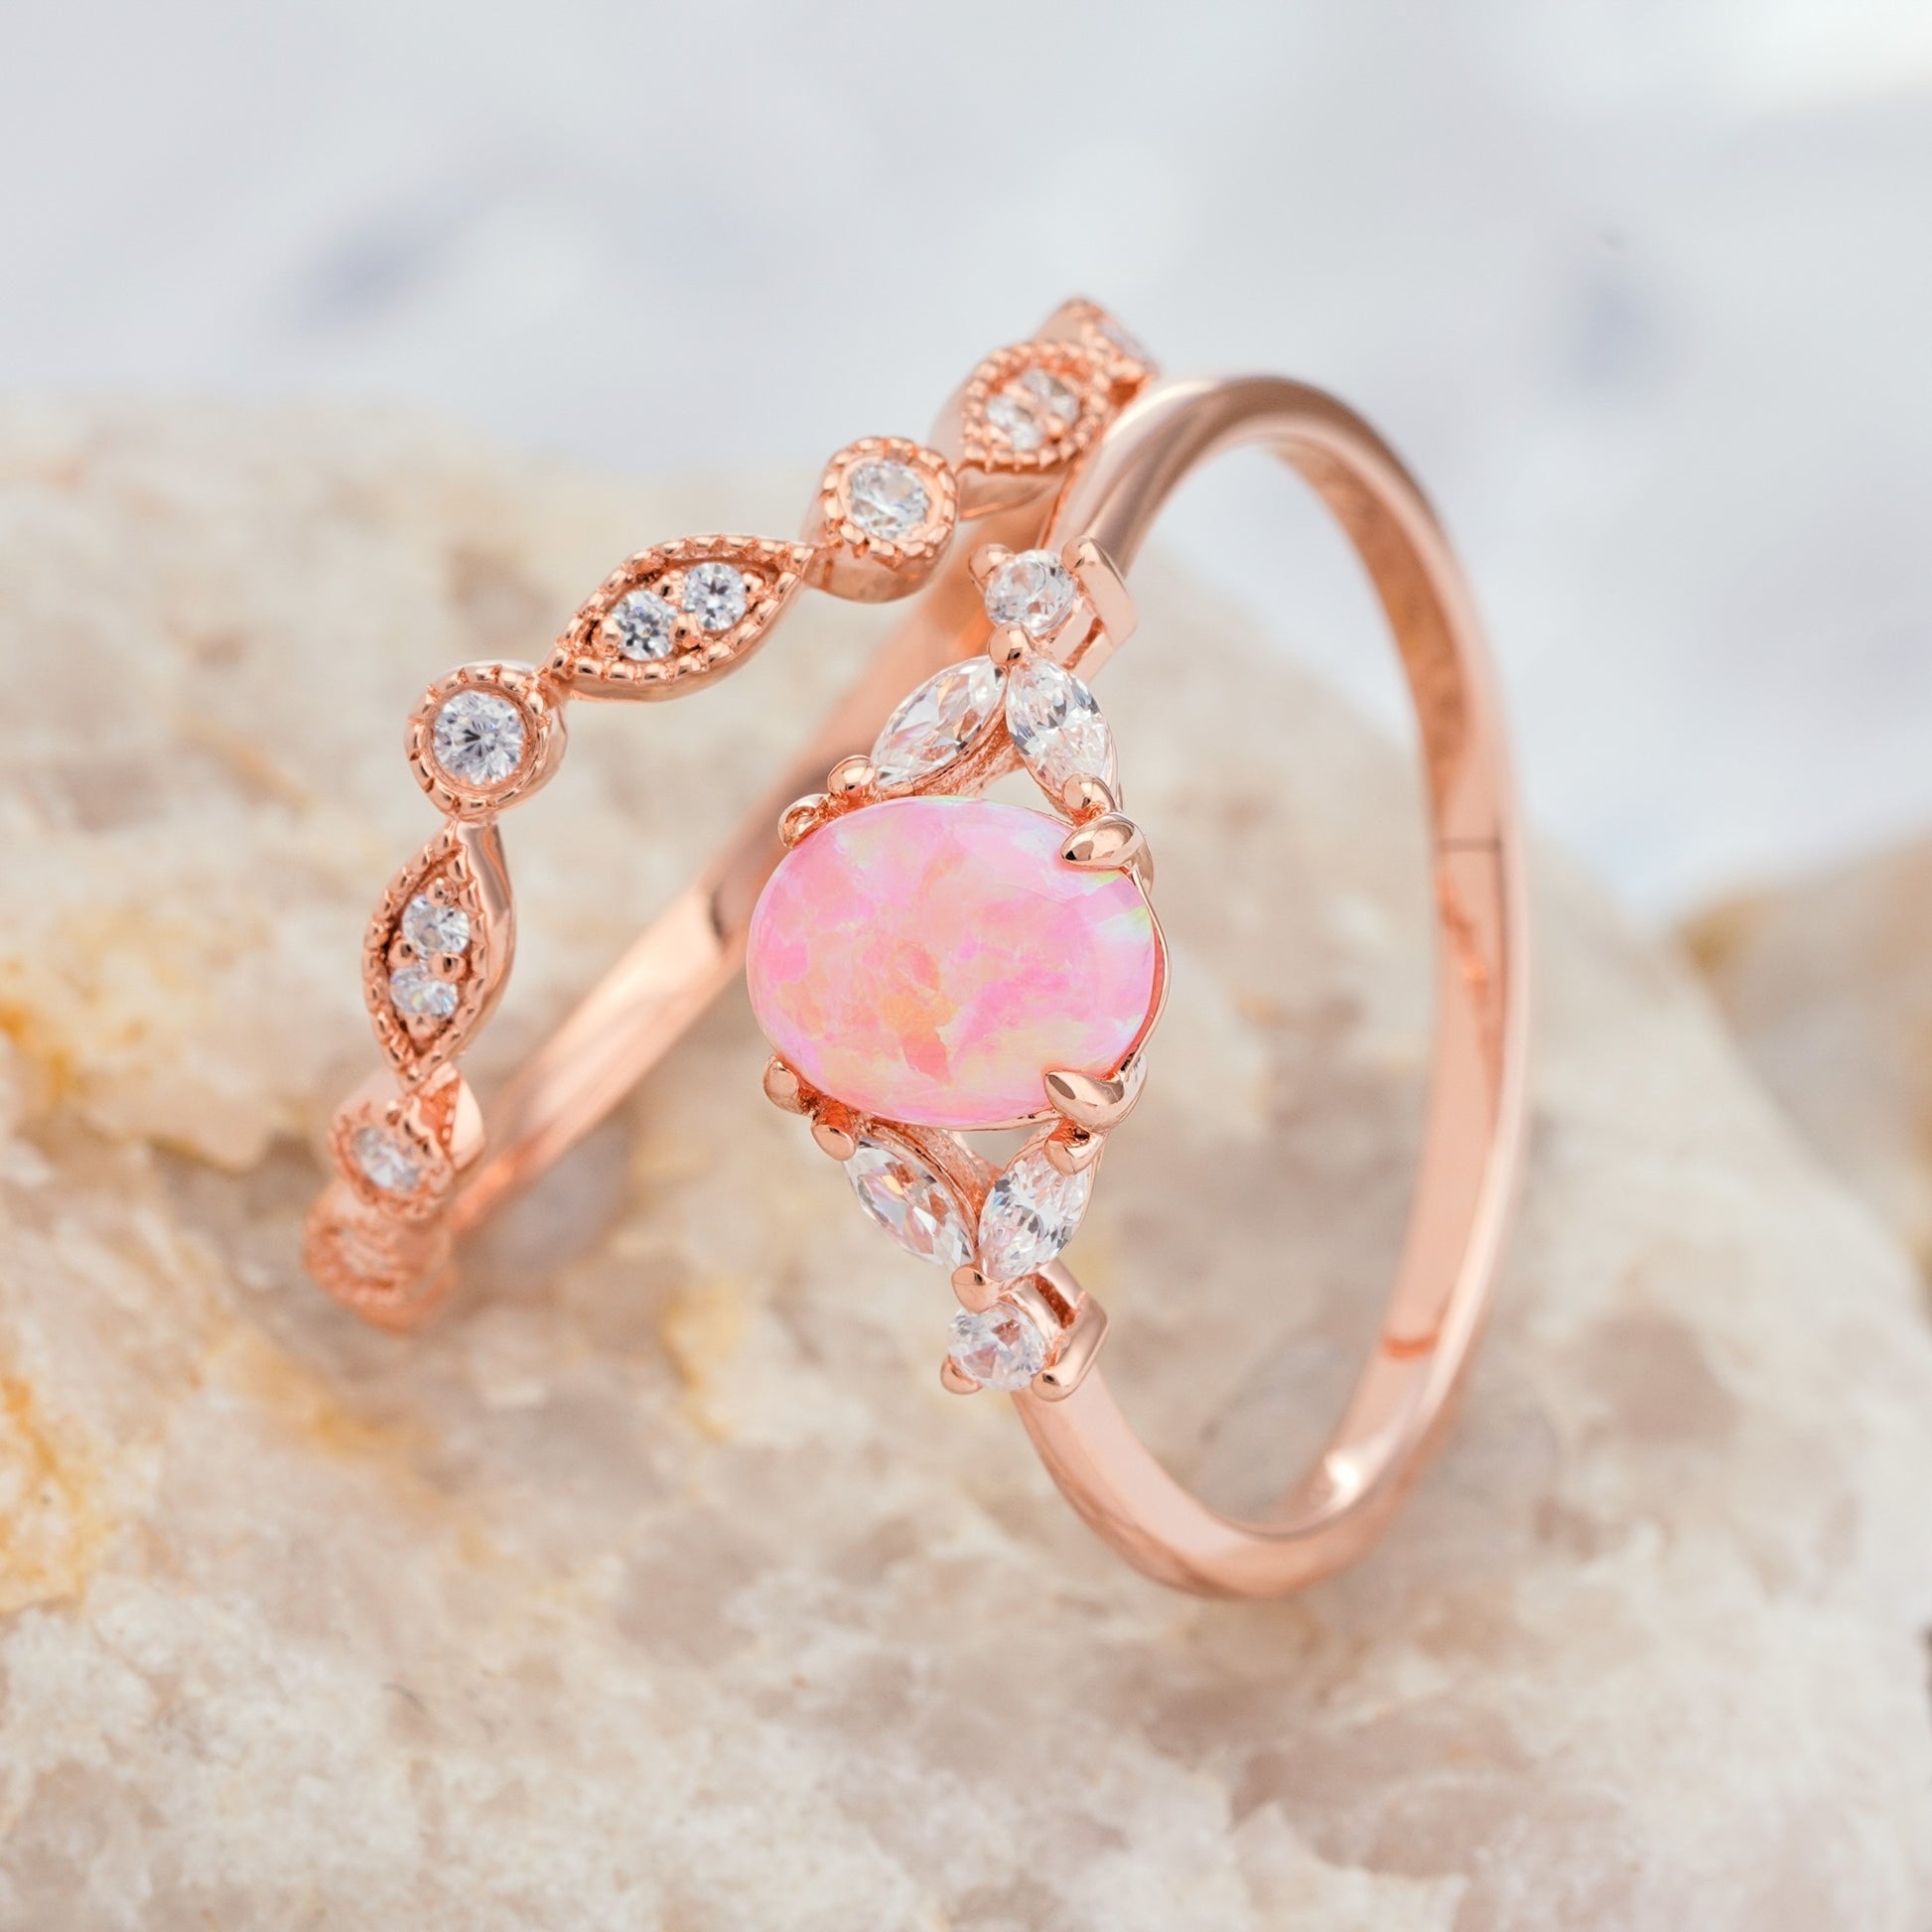 Oval Pink Opal Engagement Natural Diamond Ring Set in 14K/18K Gold - ShainJewelry